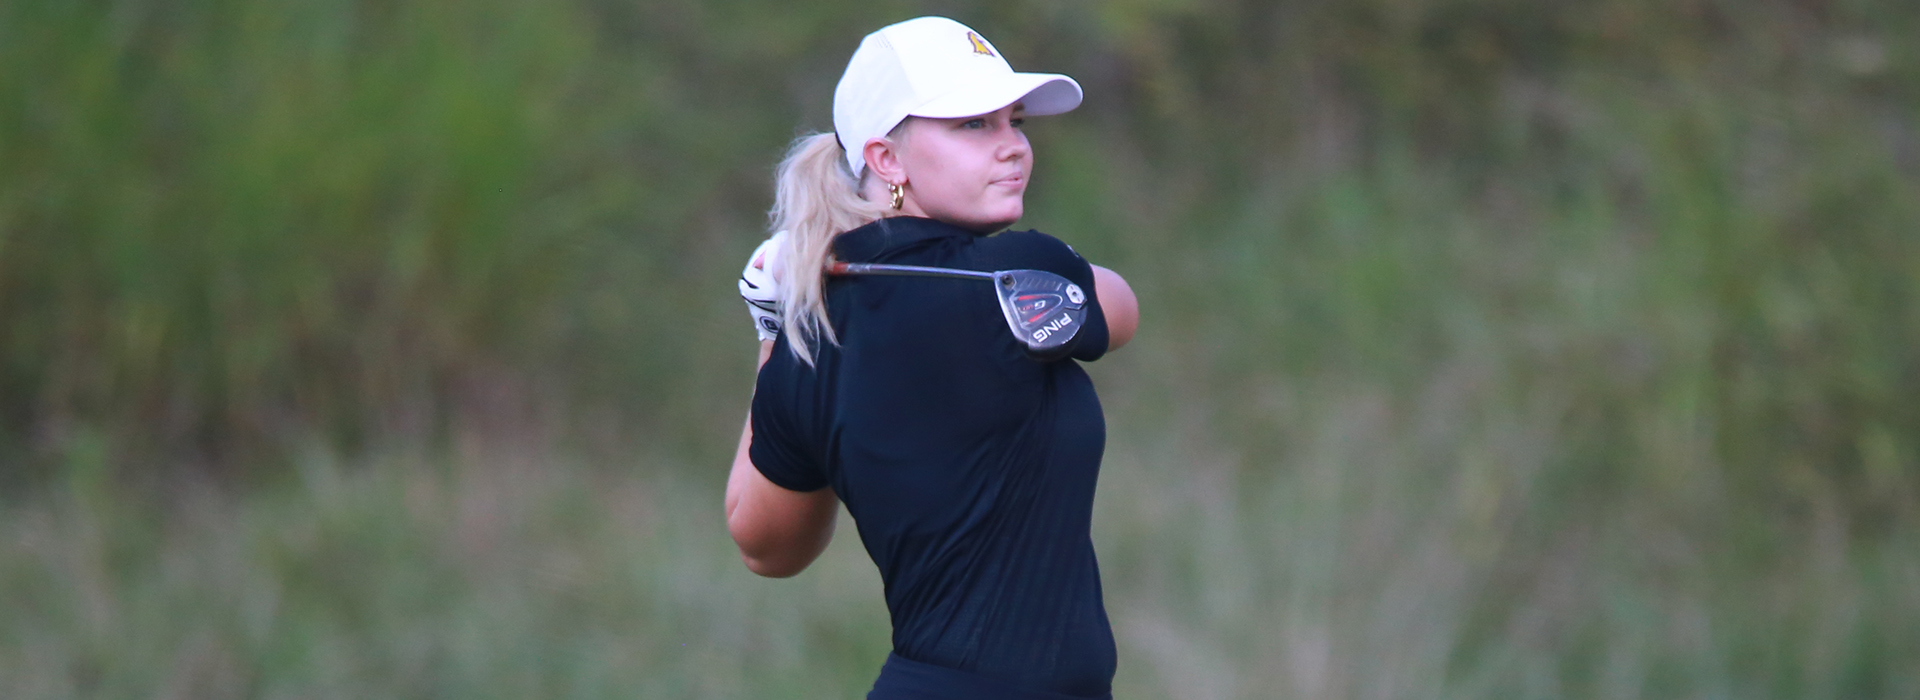 Tech women's golf team ninth and eleventh after day one of BNI